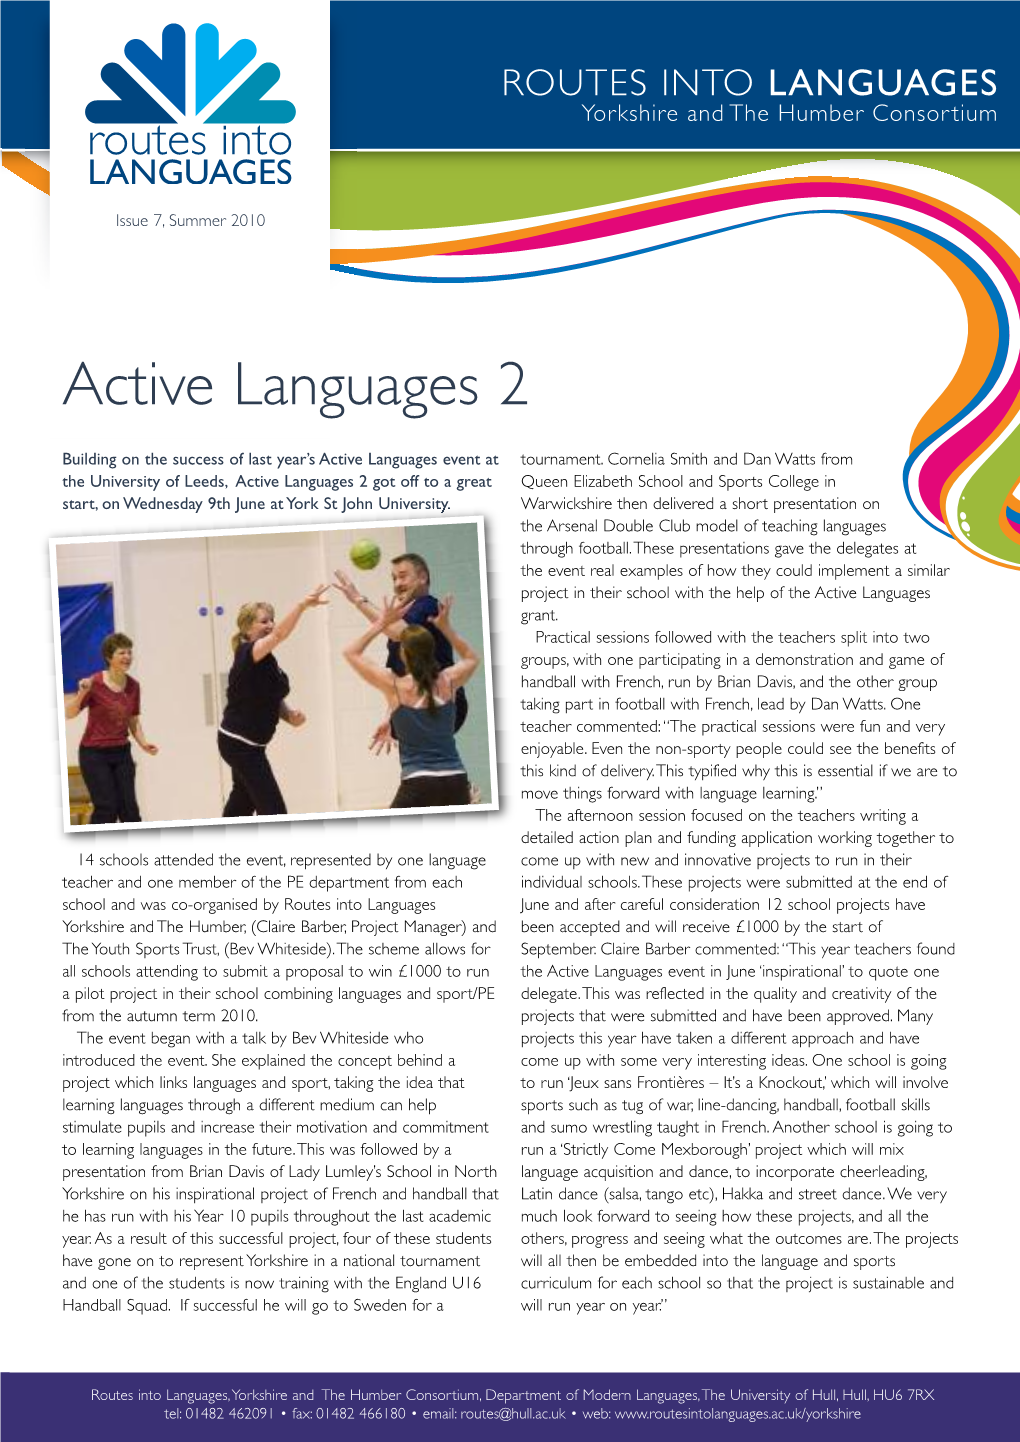 ROUTES INTO LANGUAGES Yorkshire and the Humber Consortium